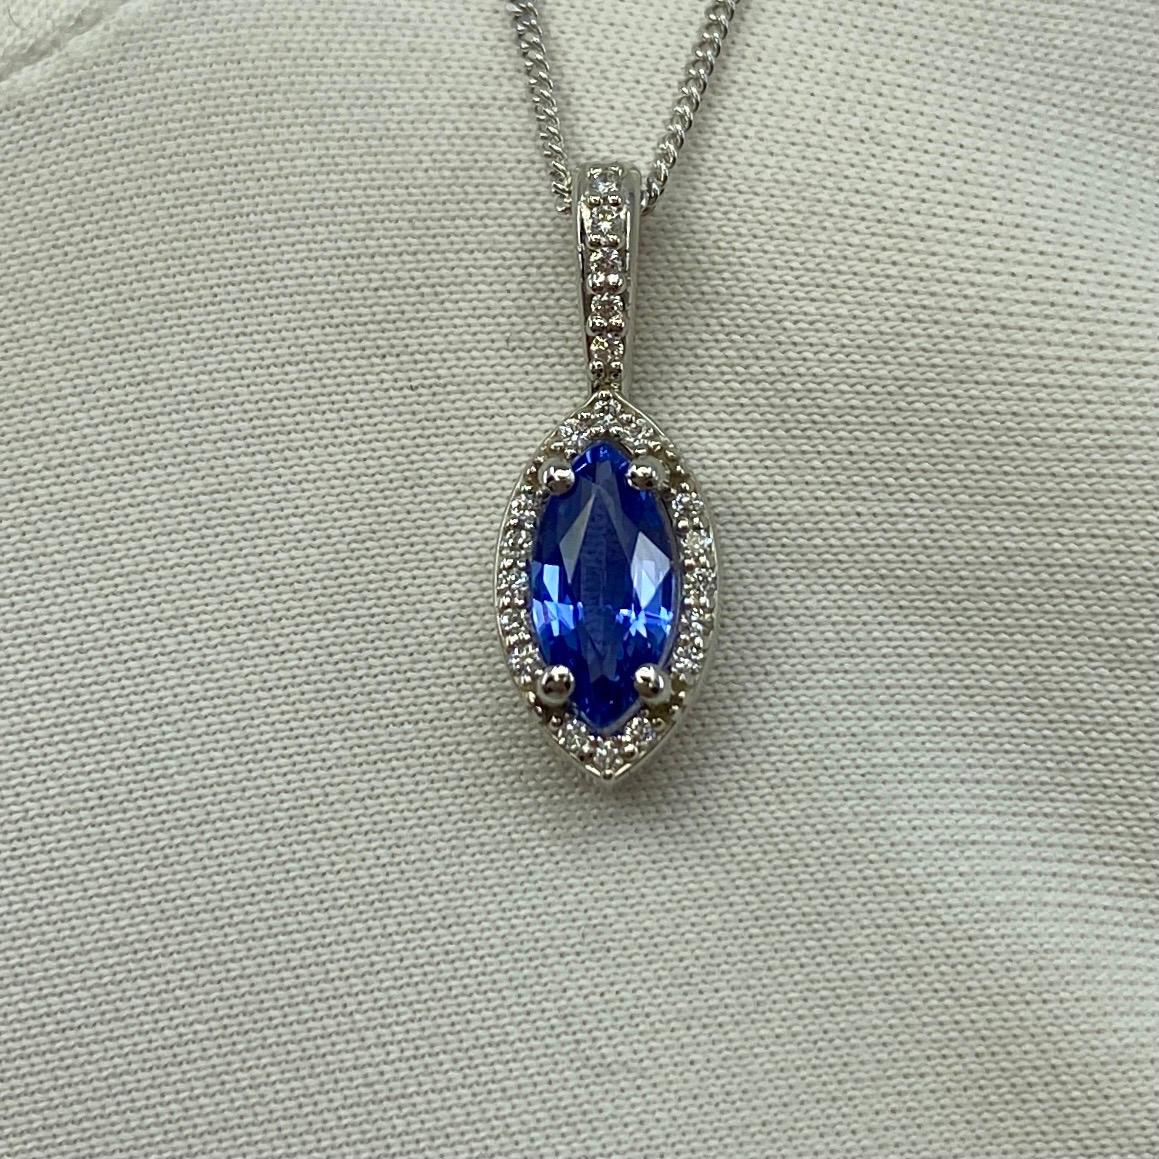 Fine Cornflower Blue Ceylon Sapphire & Diamond Marquise Platinum Halo Pendant Necklace.

0.65 Carat centre sapphire with a fine vivid cornflower blue colour and excellent clarity, very clean stone. Also has an excellent marquise cut, measures